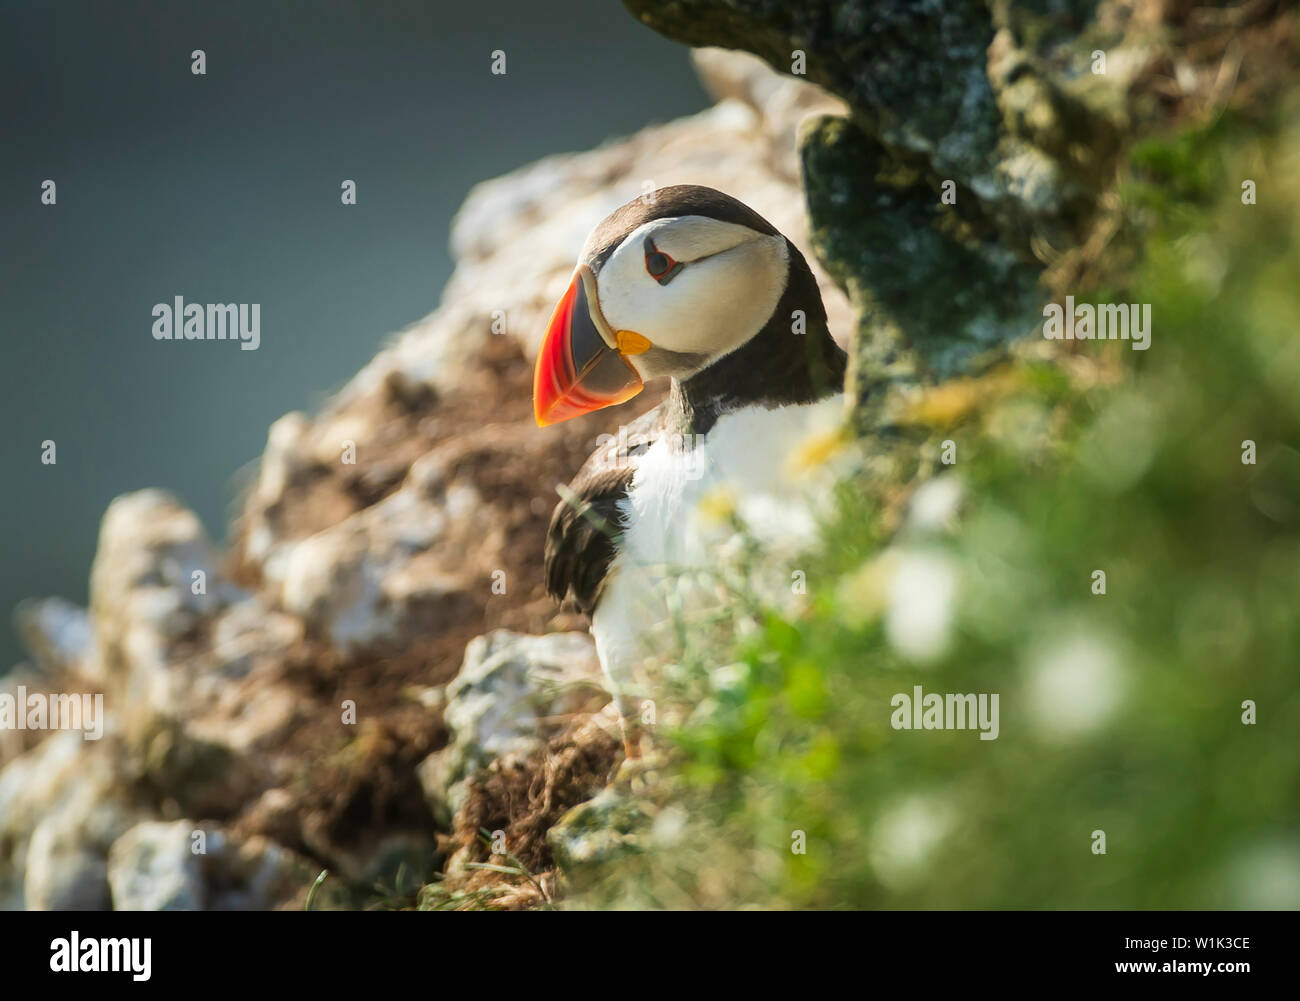 A Puffin nests at the RSPB nature reserve at Bempton Cliffs in Yorkshire, as over 250,000 seabirds flock to the chalk cliffs to find a mate and raise their young. Stock Photo